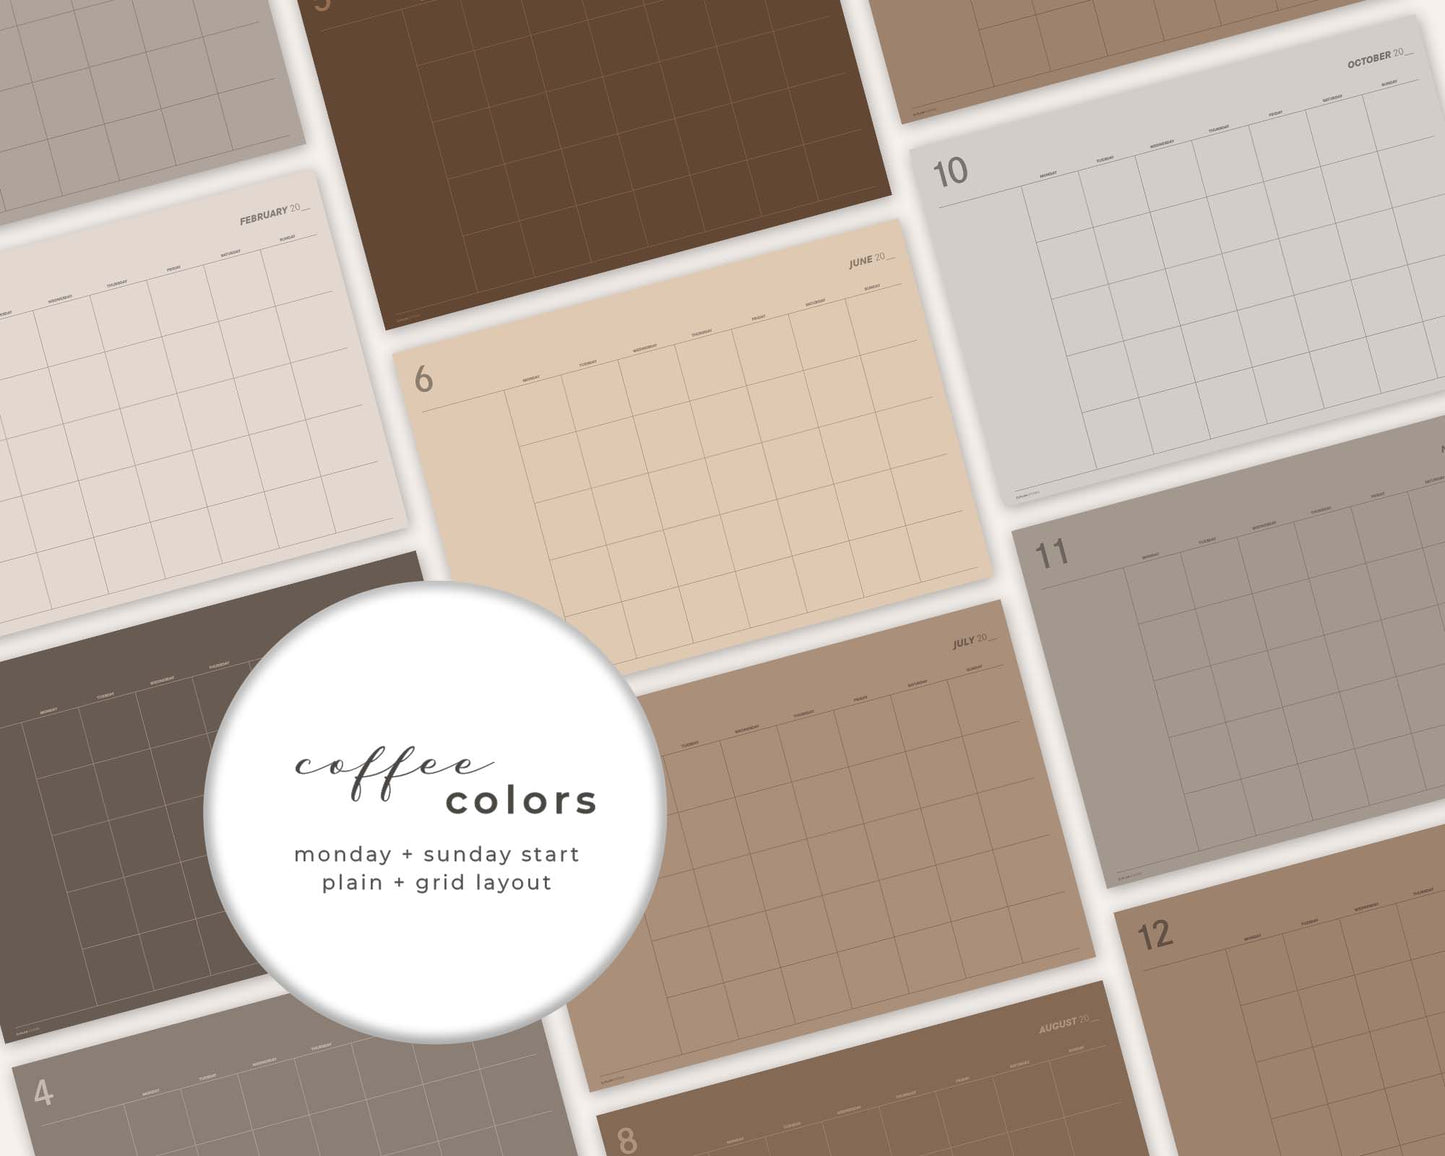 Undated Digital Monthly Planner - Coffee theme